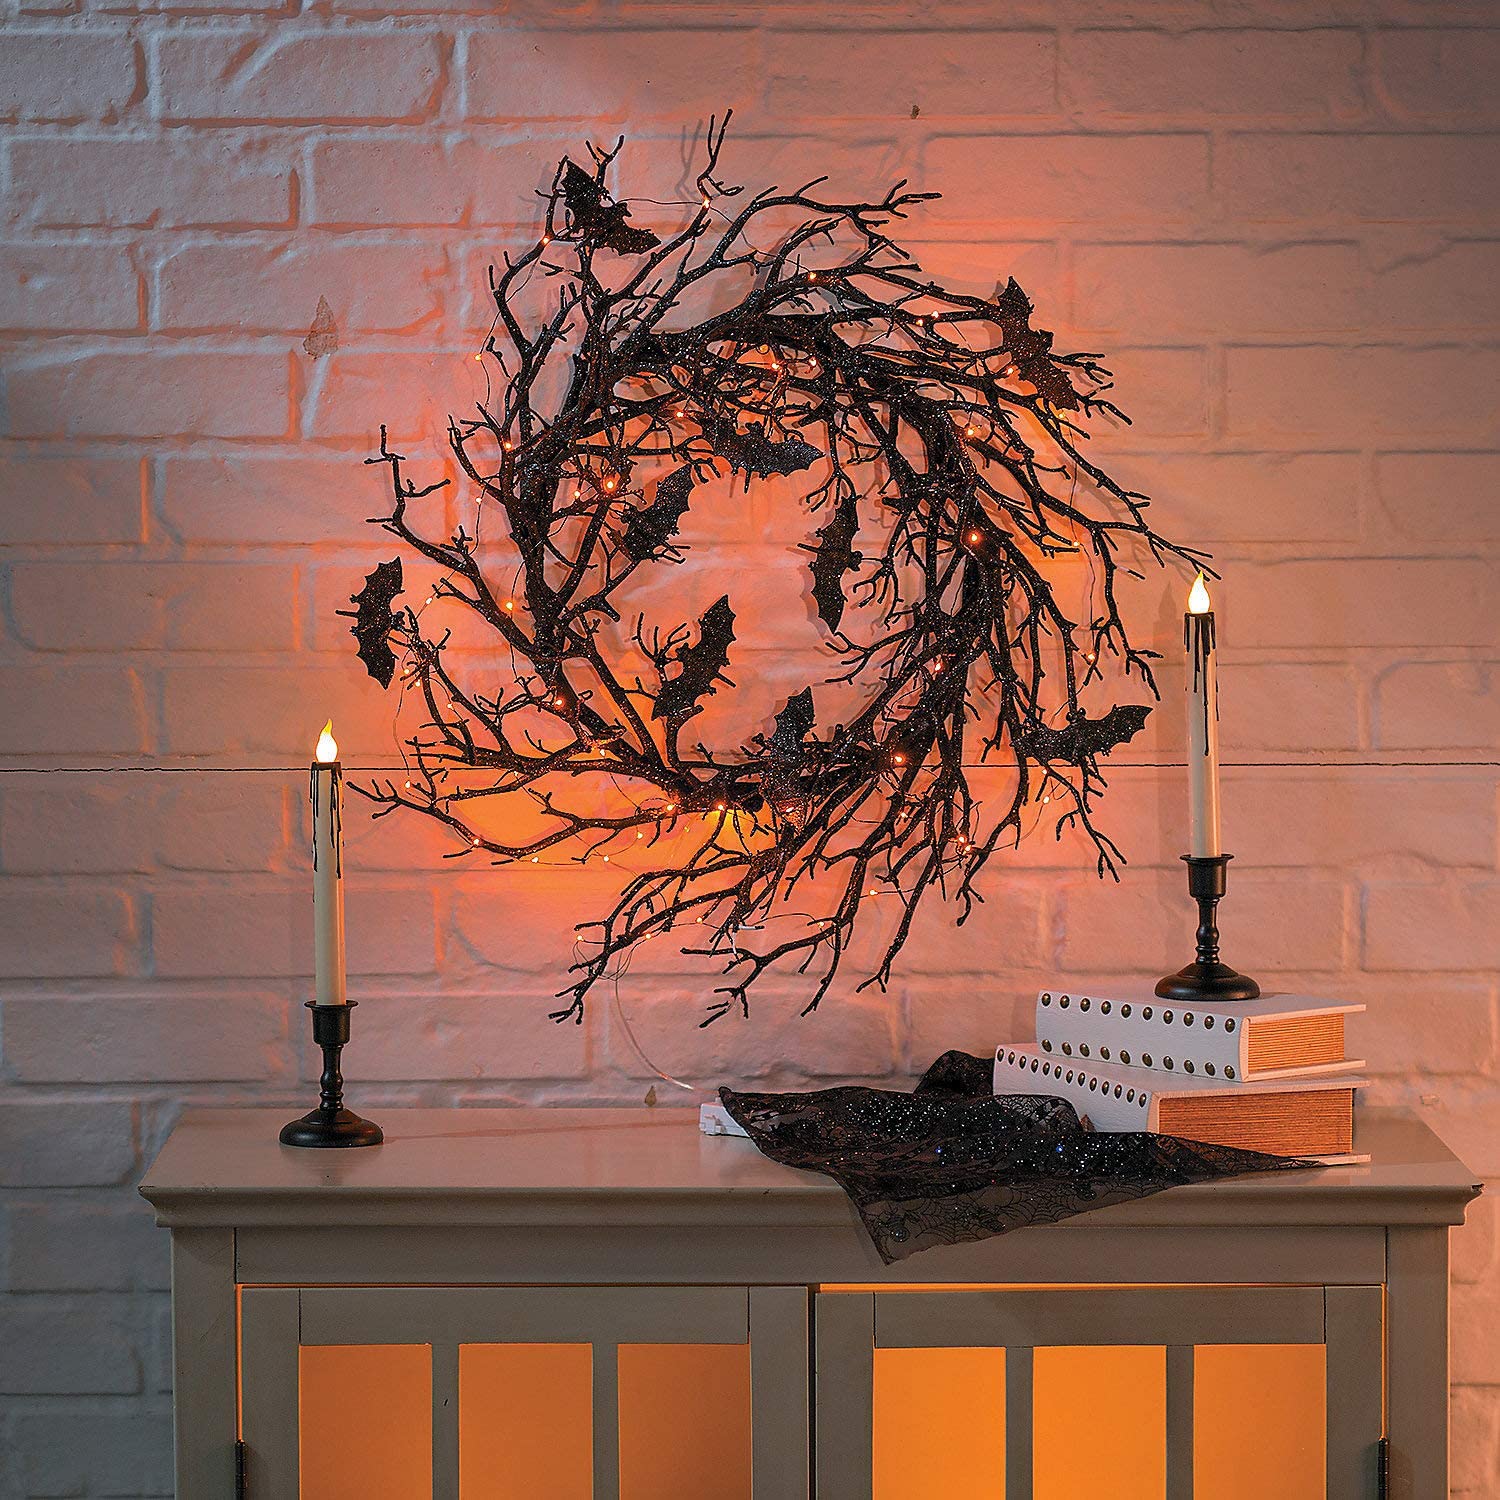 Wreath of branches and bats - Halloween decor ideas